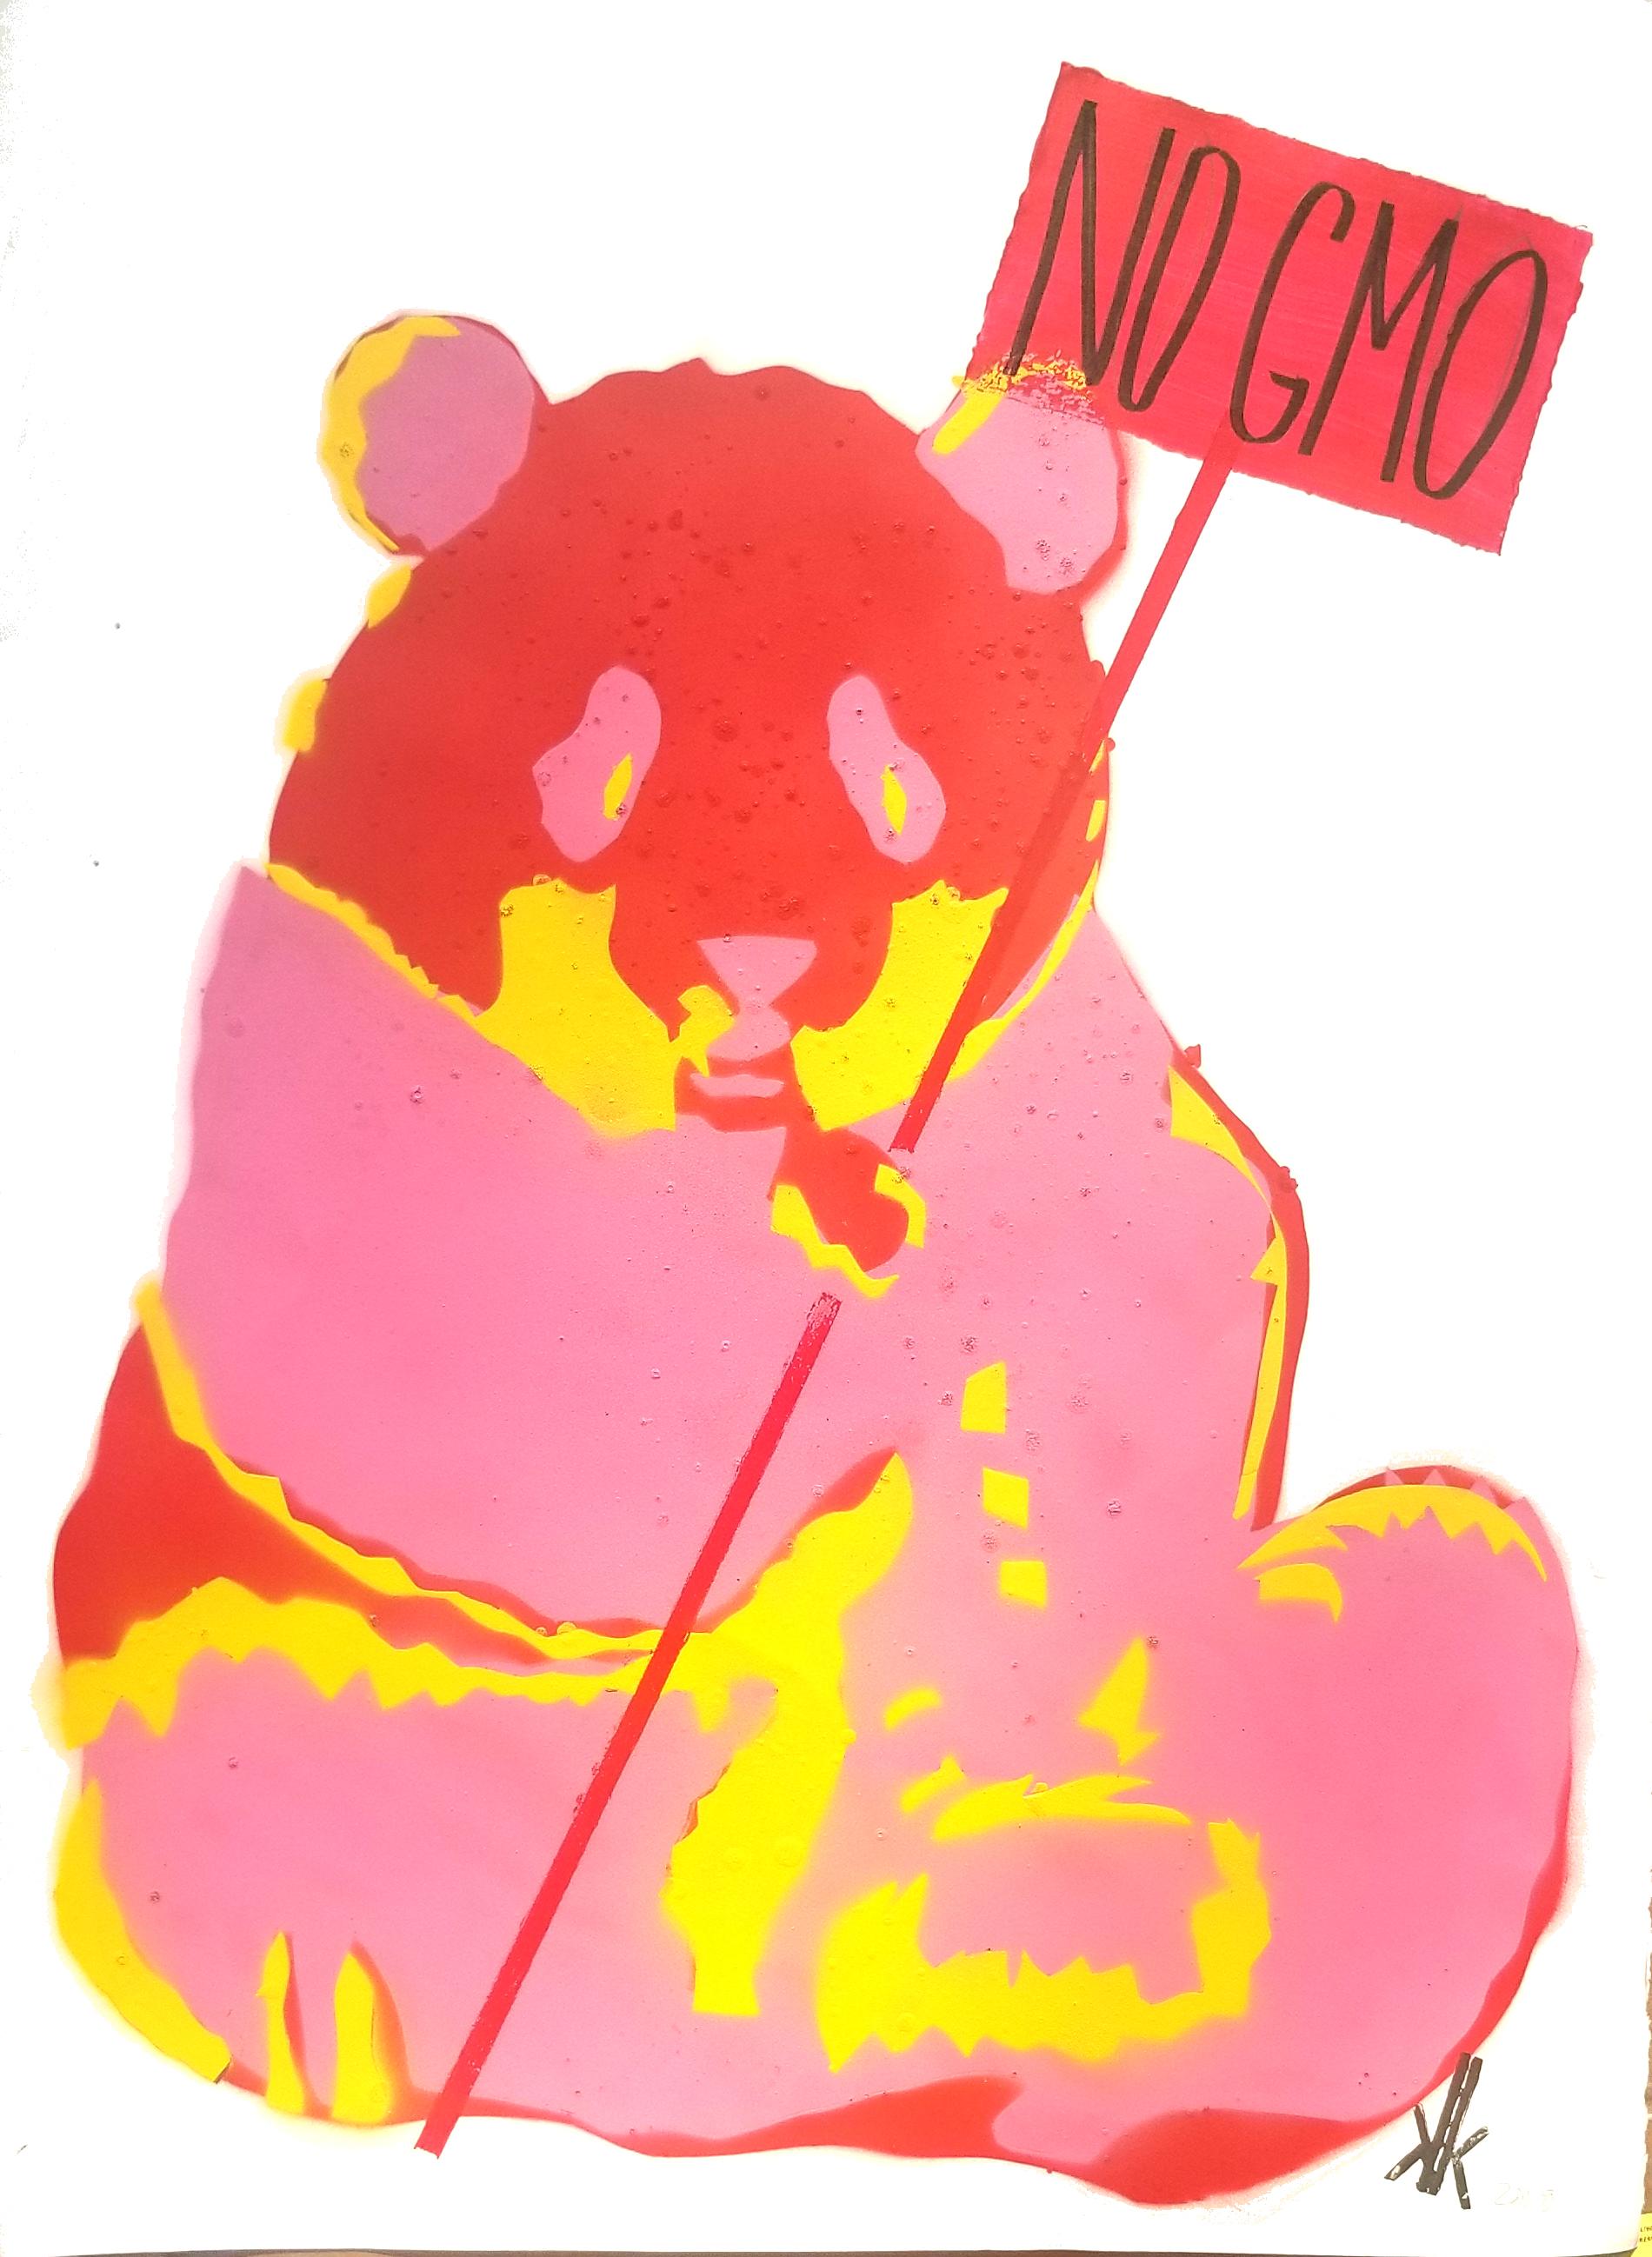 5 layer stencil painting ( Pink, Silver, Red, Black )
Panda Bear holding a FEMINIST sign
Political statements in text
These are NOT prints. Original works on paper,

Comes rolled in a tube
Unique pieces
This is on 90lb Paper color: Natural

New York